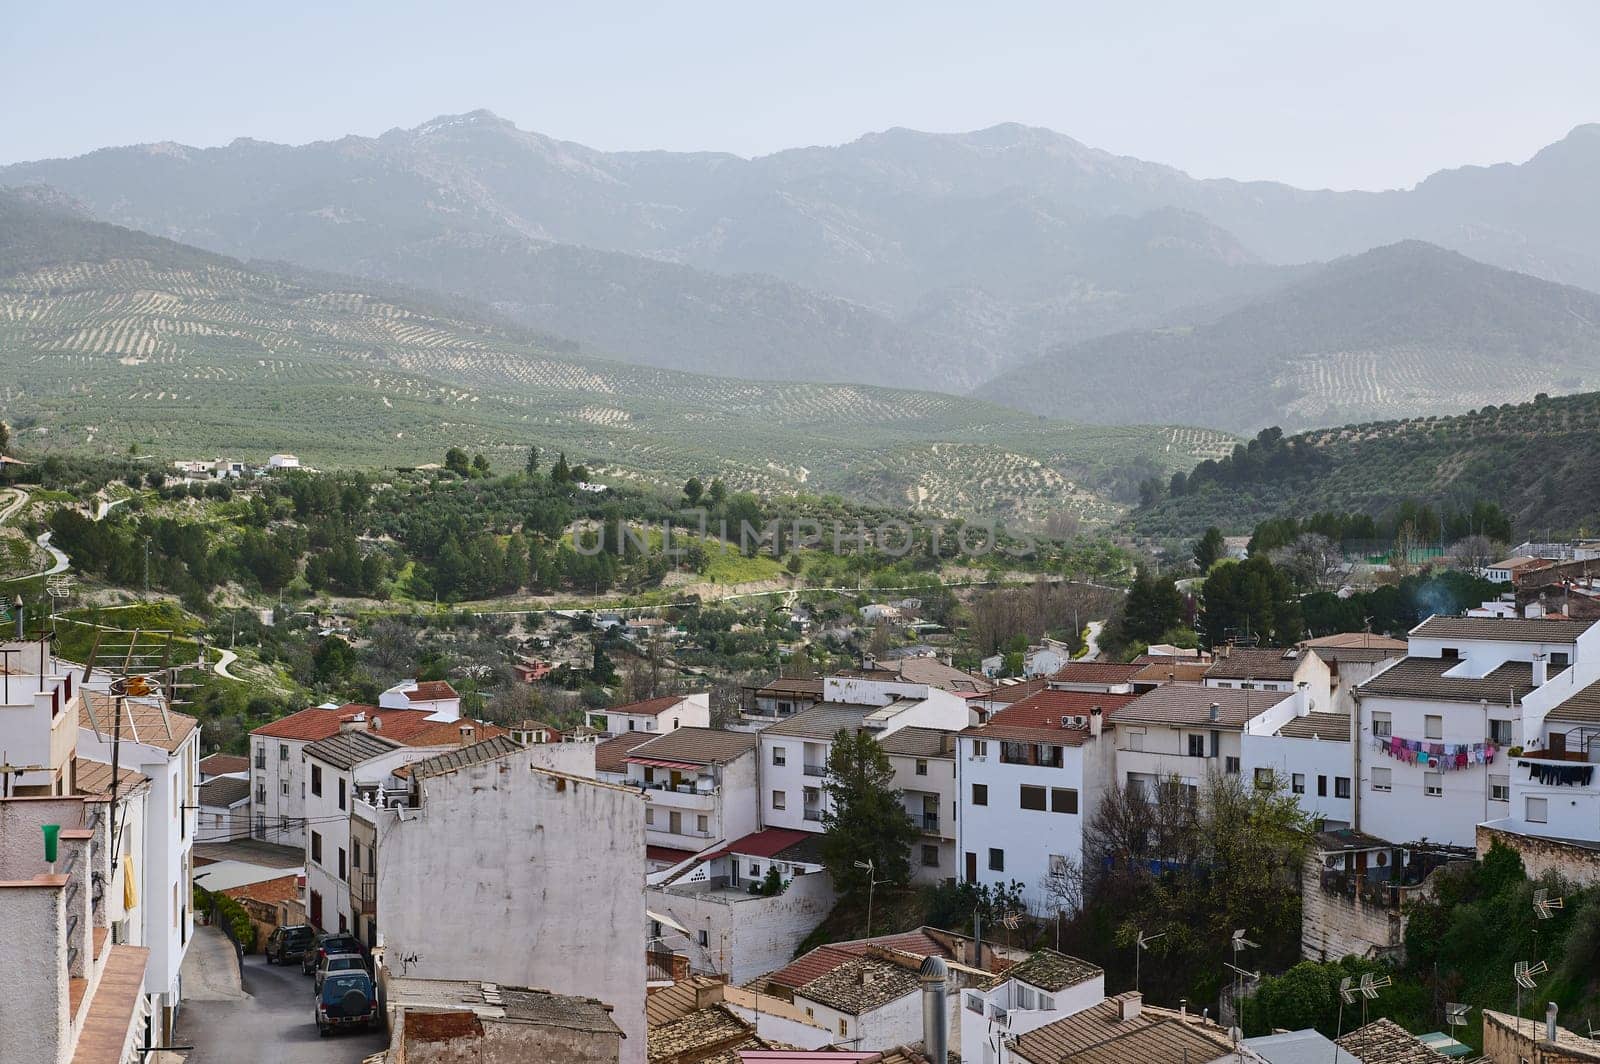 View of beautiful medieval district of Spanish village, Quesada in the region of Jaen, Andalusia, Spain in mountains. White houses with red tiles over mountain ridge background of La Sierra de Cazorla